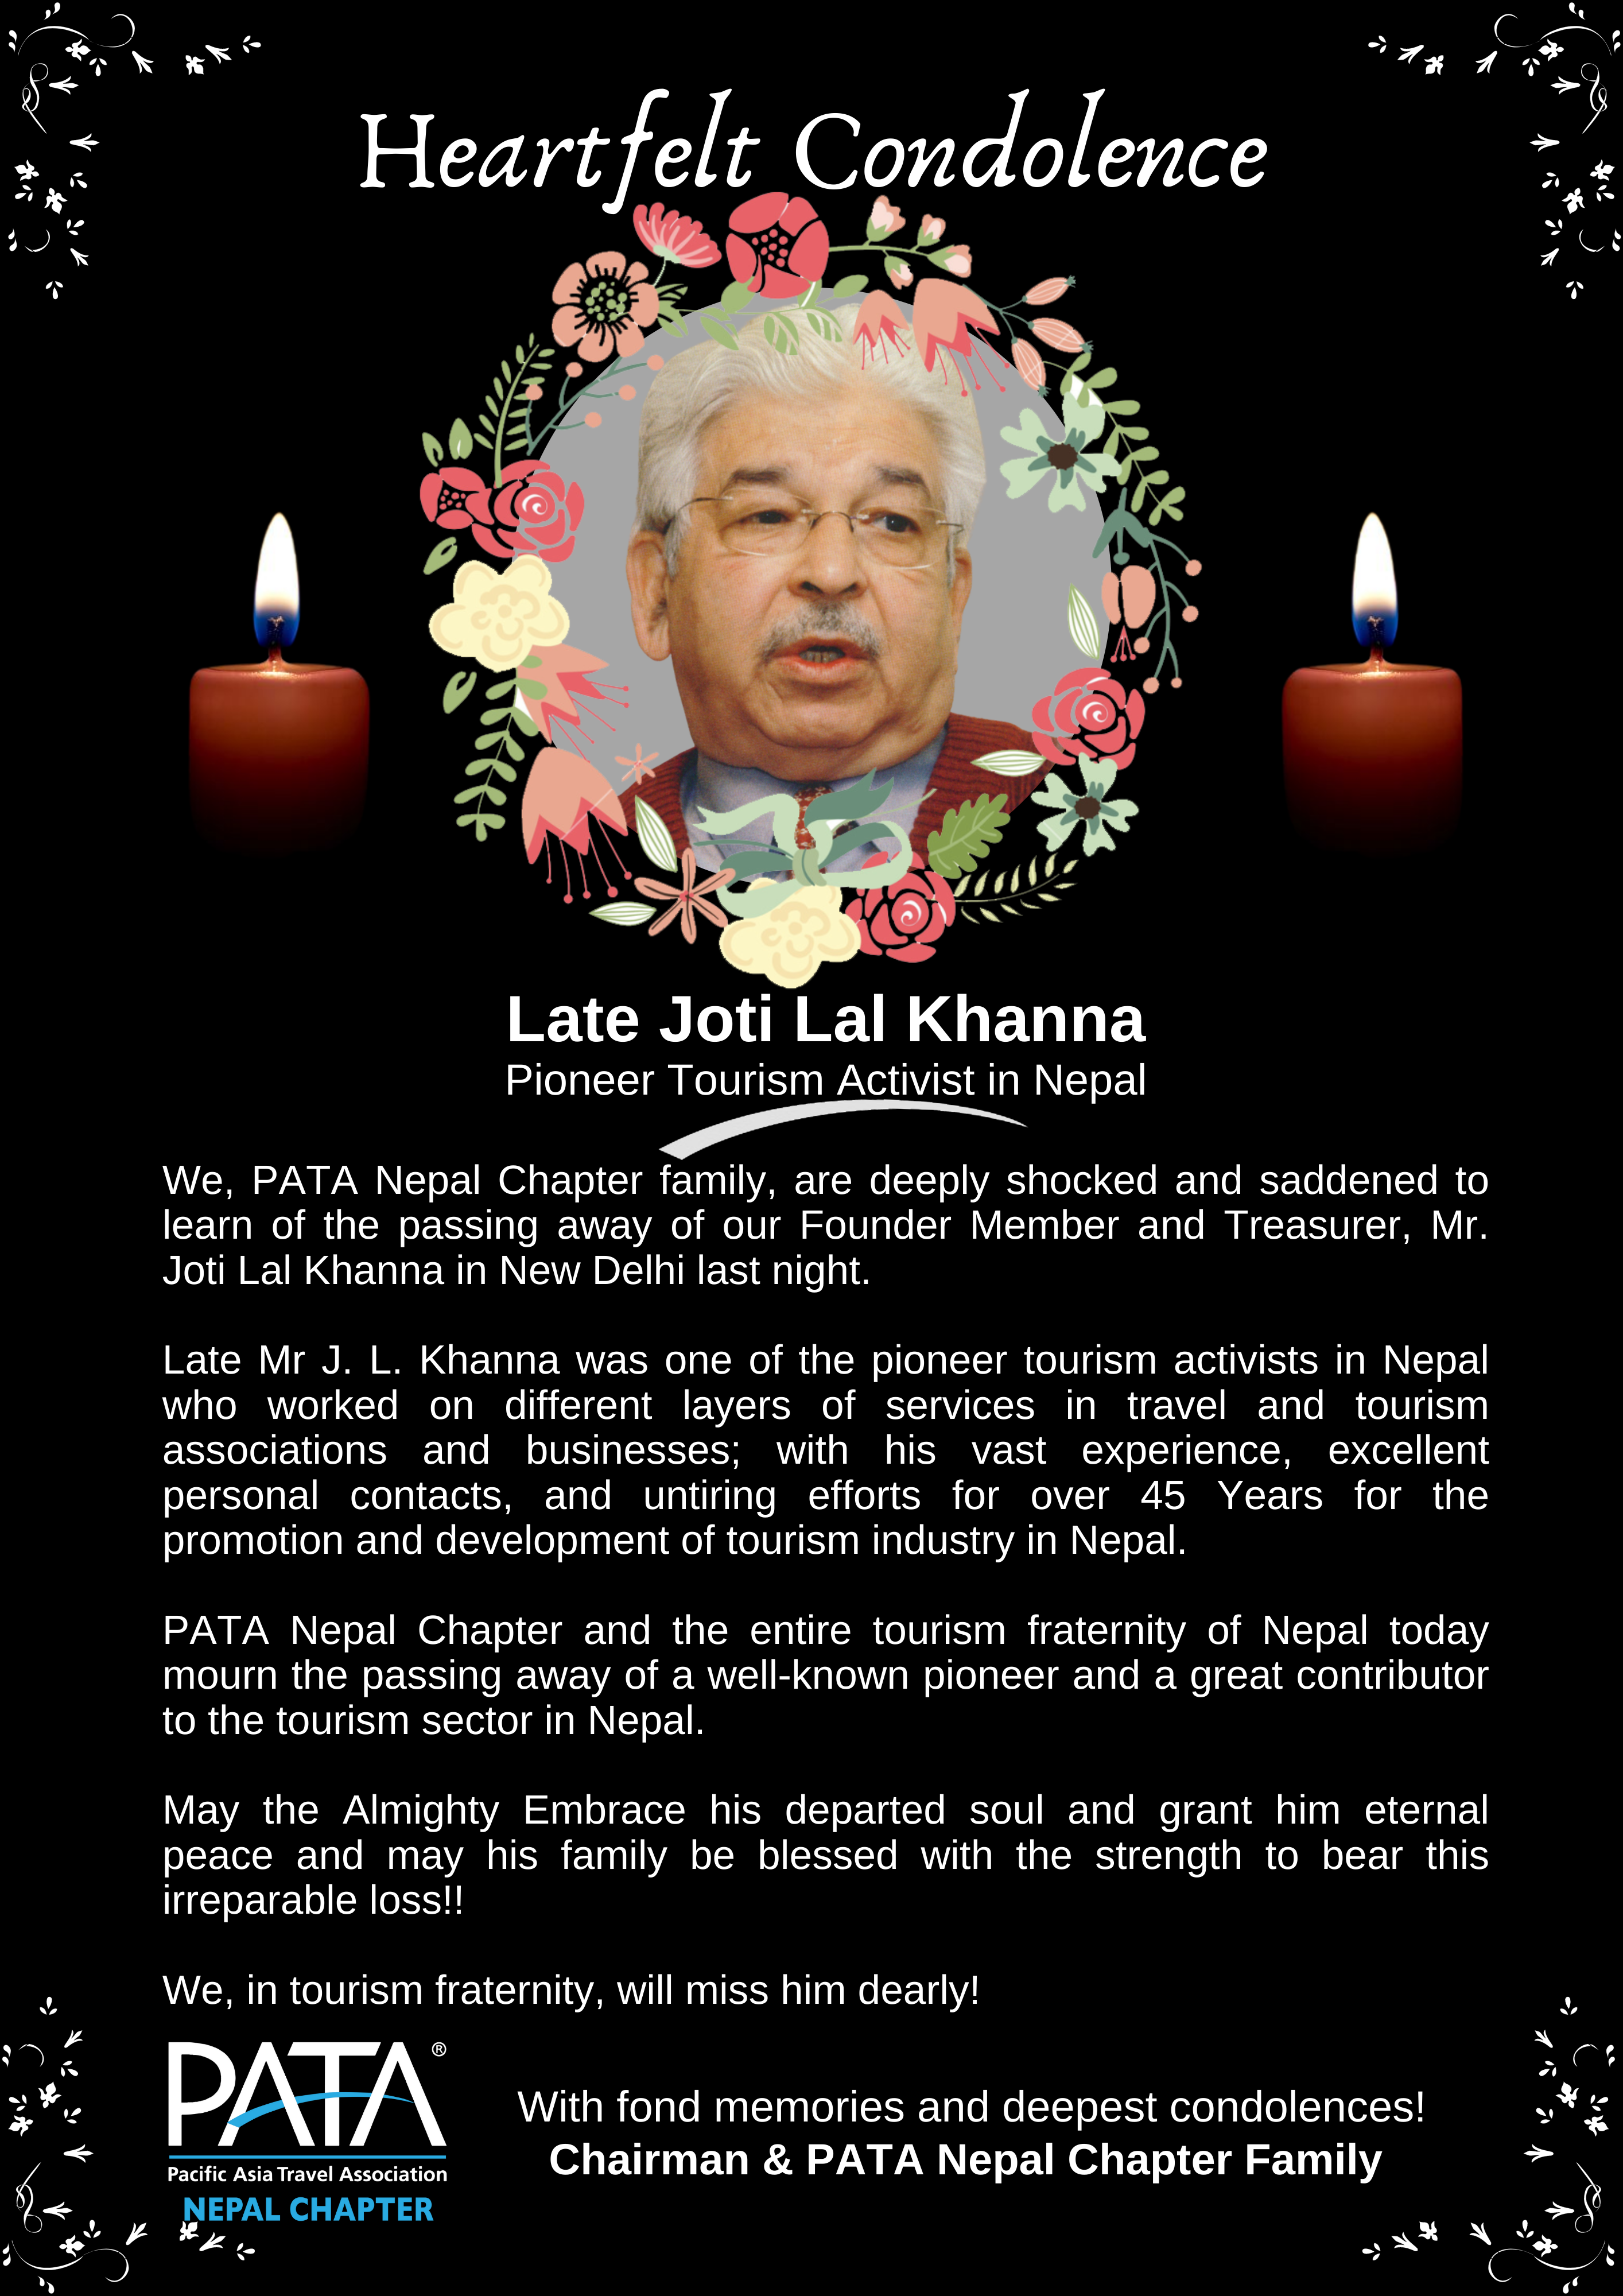 PATA Nepal mourns the passing away of Founder Member and Treasurer, Mr. Joti Lal Khanna